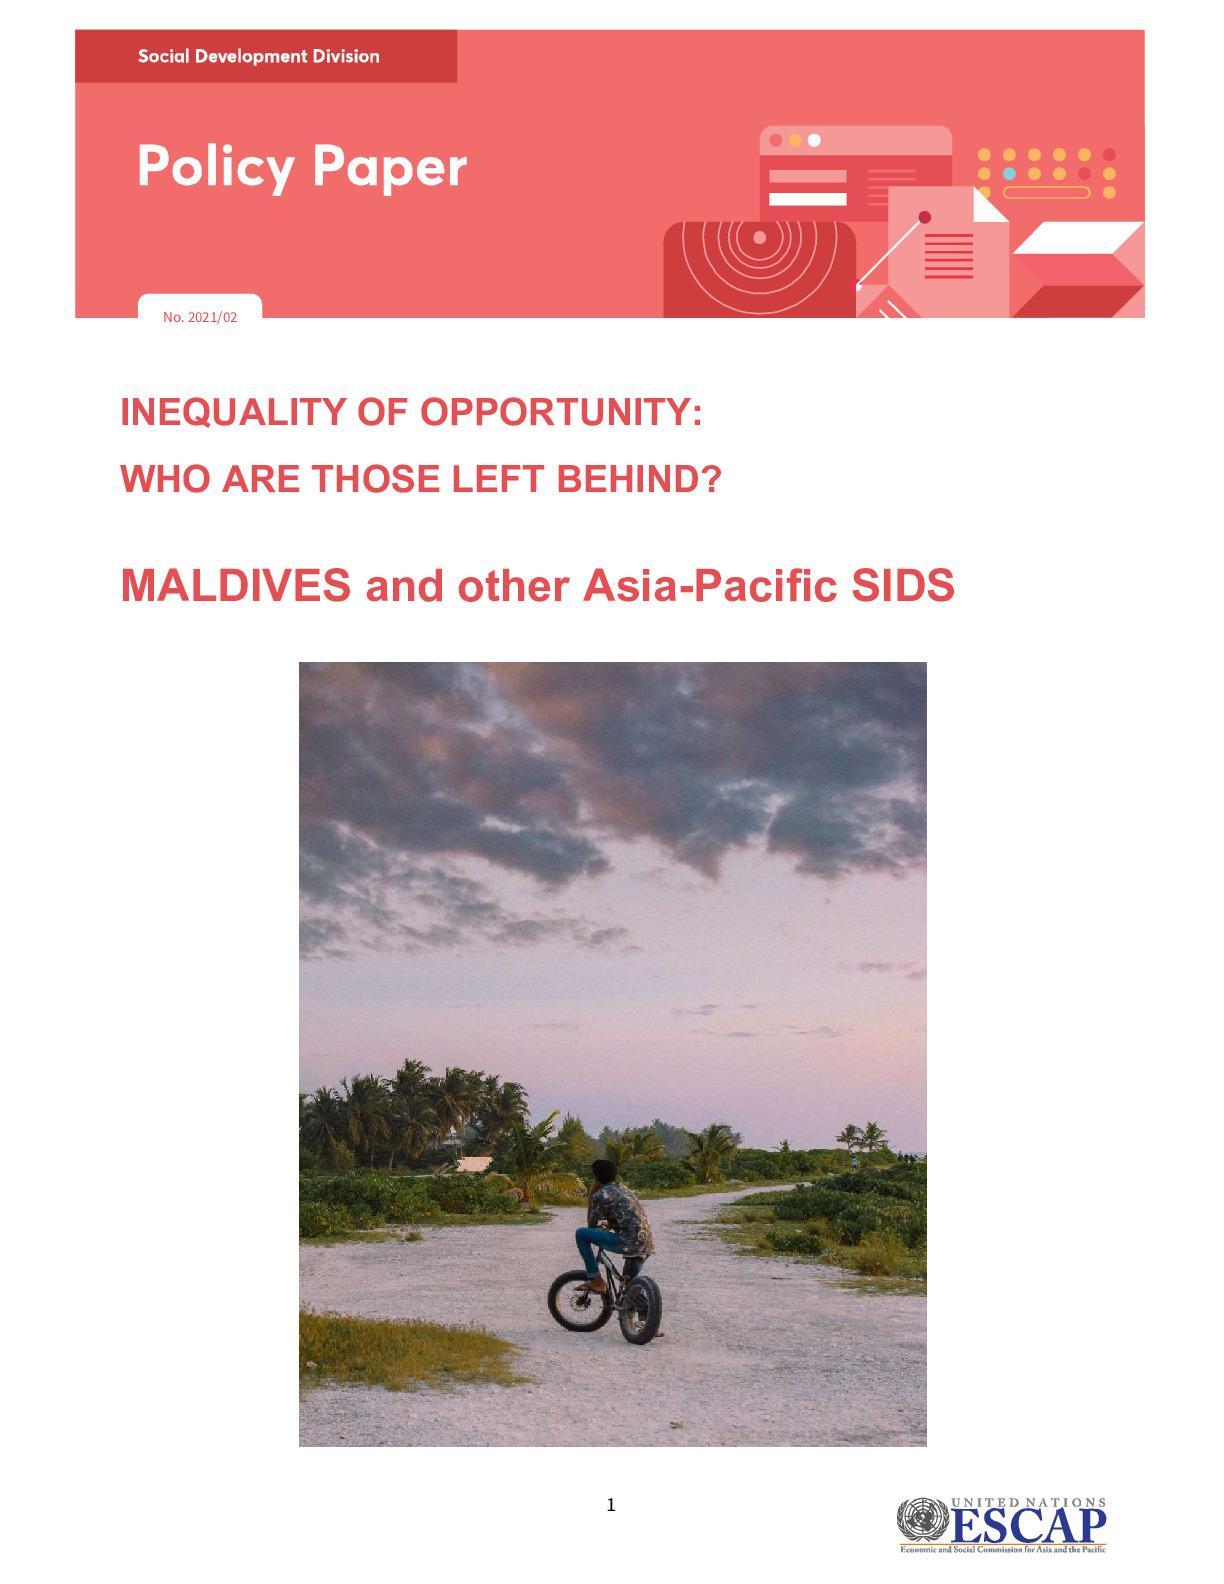 Inequality of Opportunity: Who are those left behind in Maldives and other Asia Pacific SIDS? 